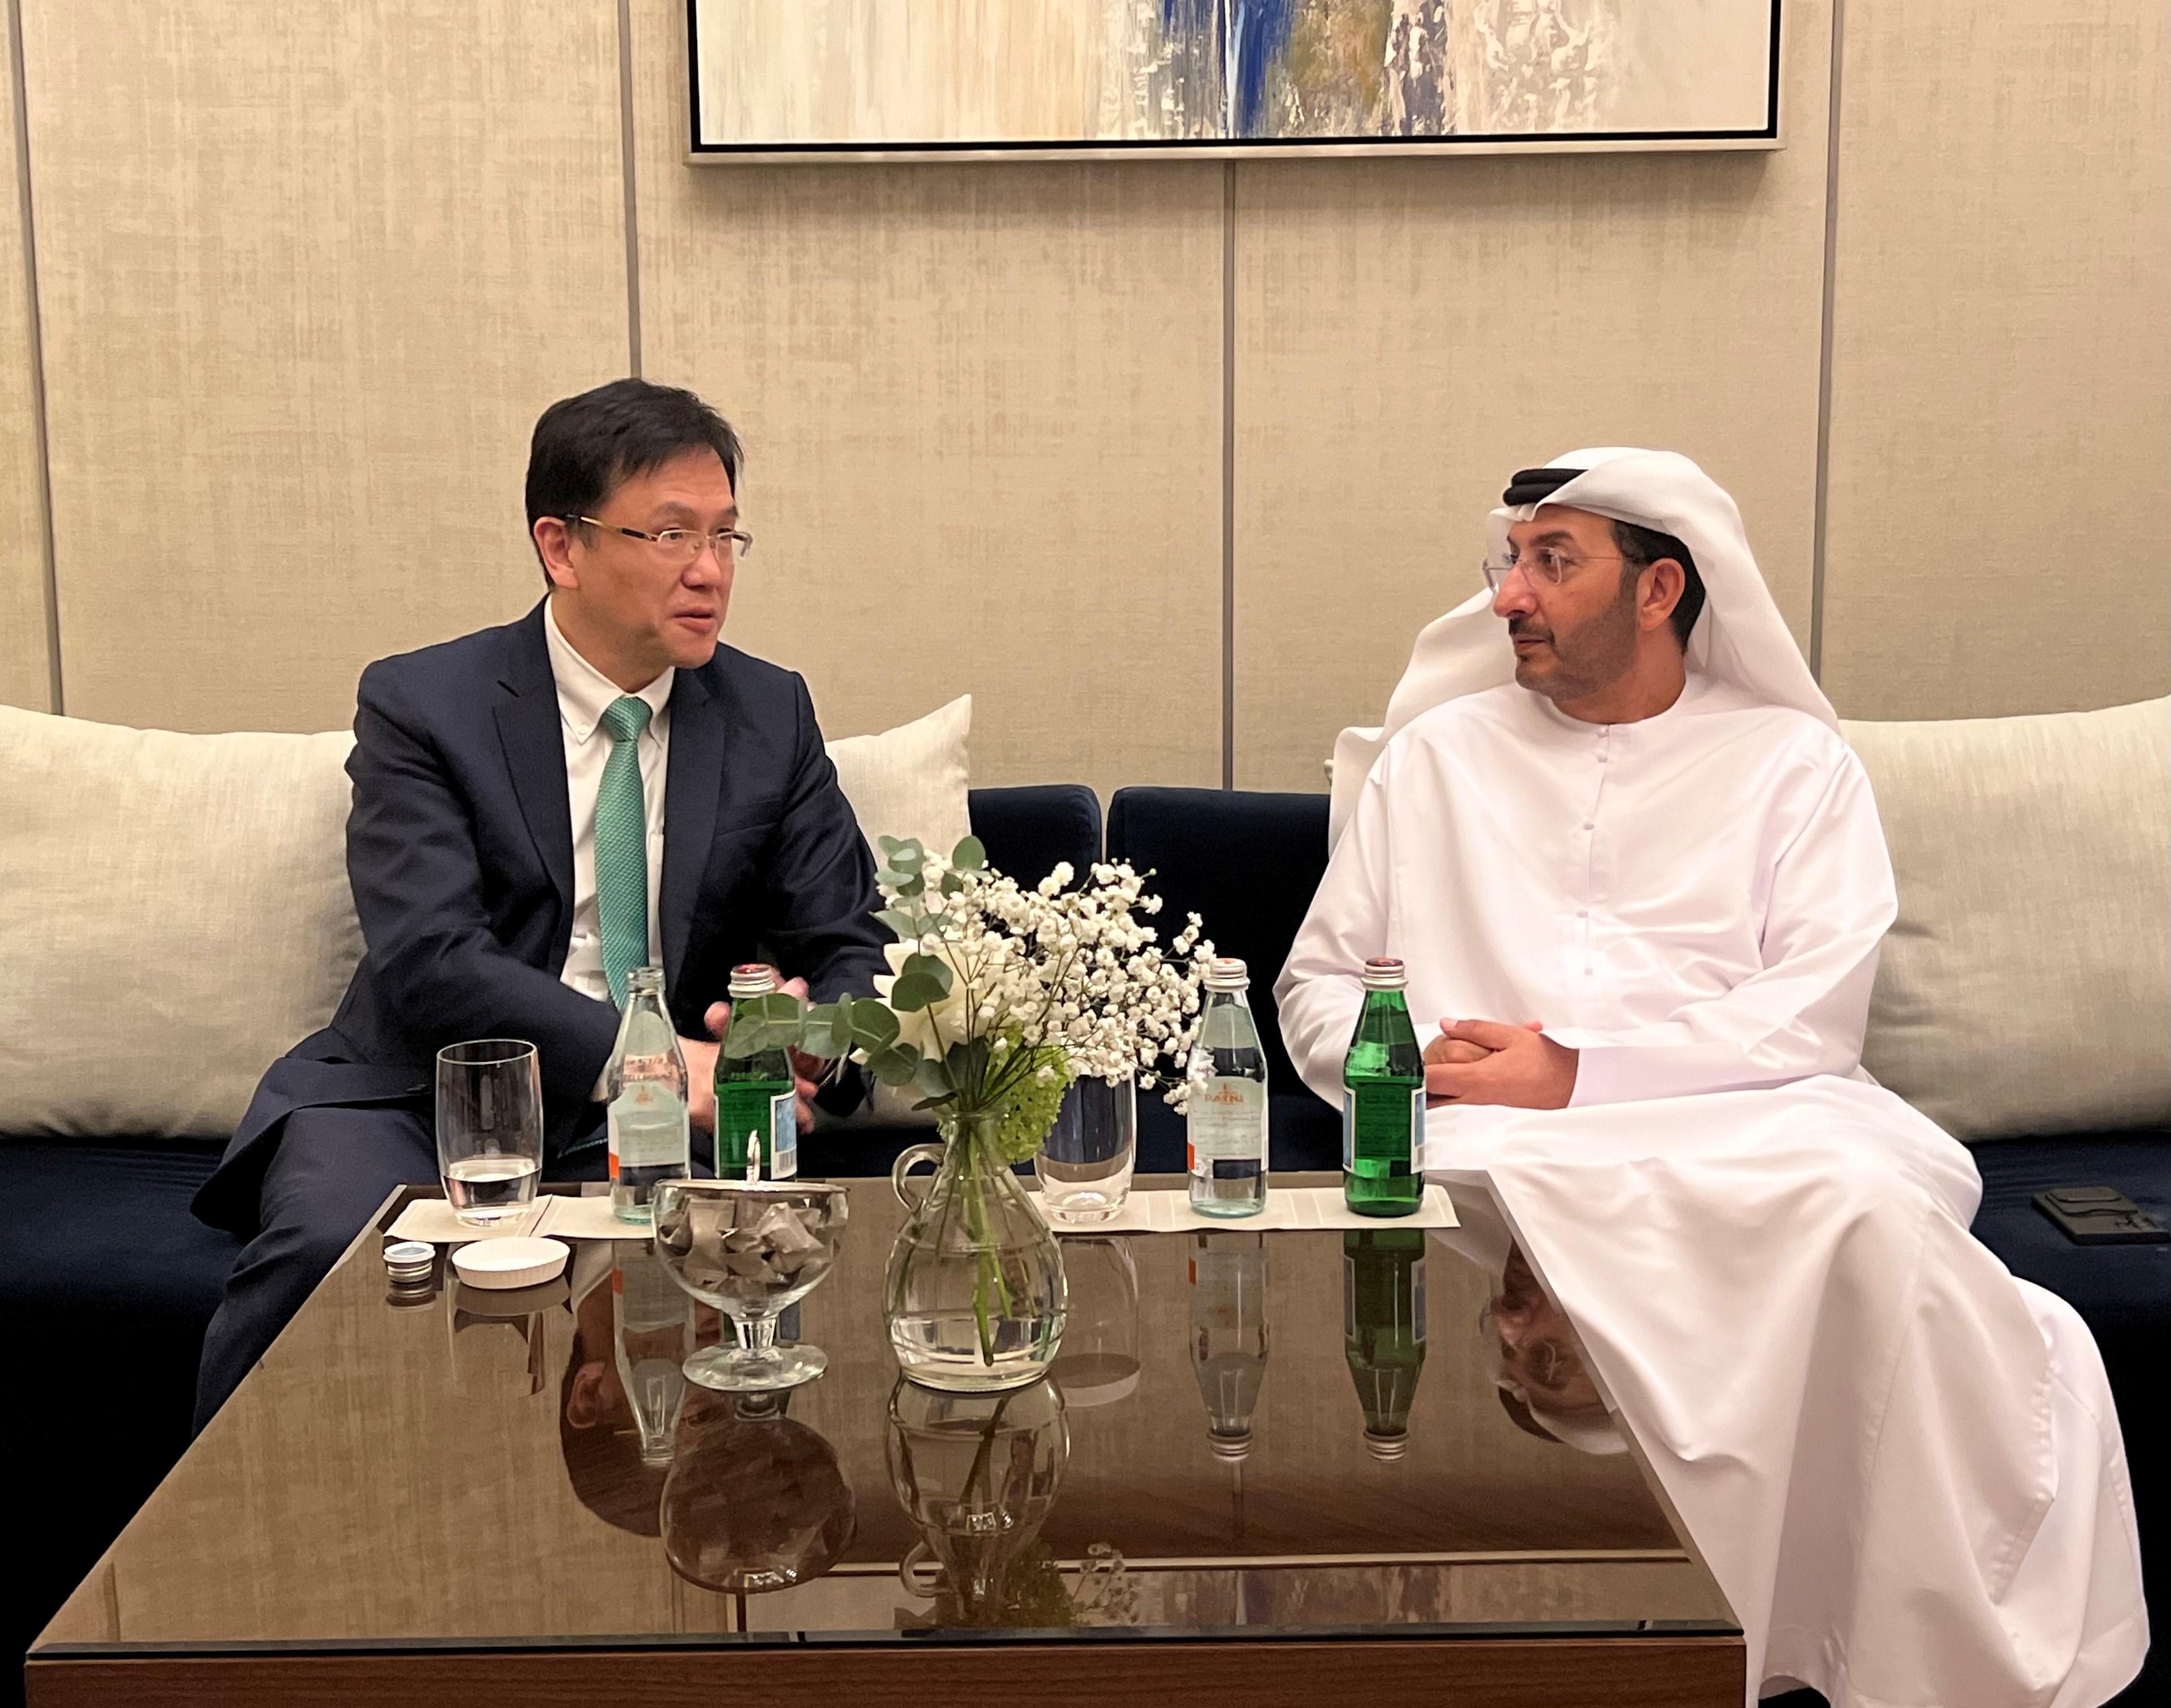 The Secretary for Innovation, Technology and Industry, Professor Sun Dong (left), attended a business luncheon hosted by the Hong Kong Economic and Trade Office in Dubai on March 6 (Dubai time), and had a brief exchange about innovation and technology development in the Hong Kong and the United Arab Emirates (UAE) with the Under Secretary of the Foreign Trade and Industry of the UAE Ministry of Economy, Mr Abdulla Al Saleh (right), who also attended the occasion.
